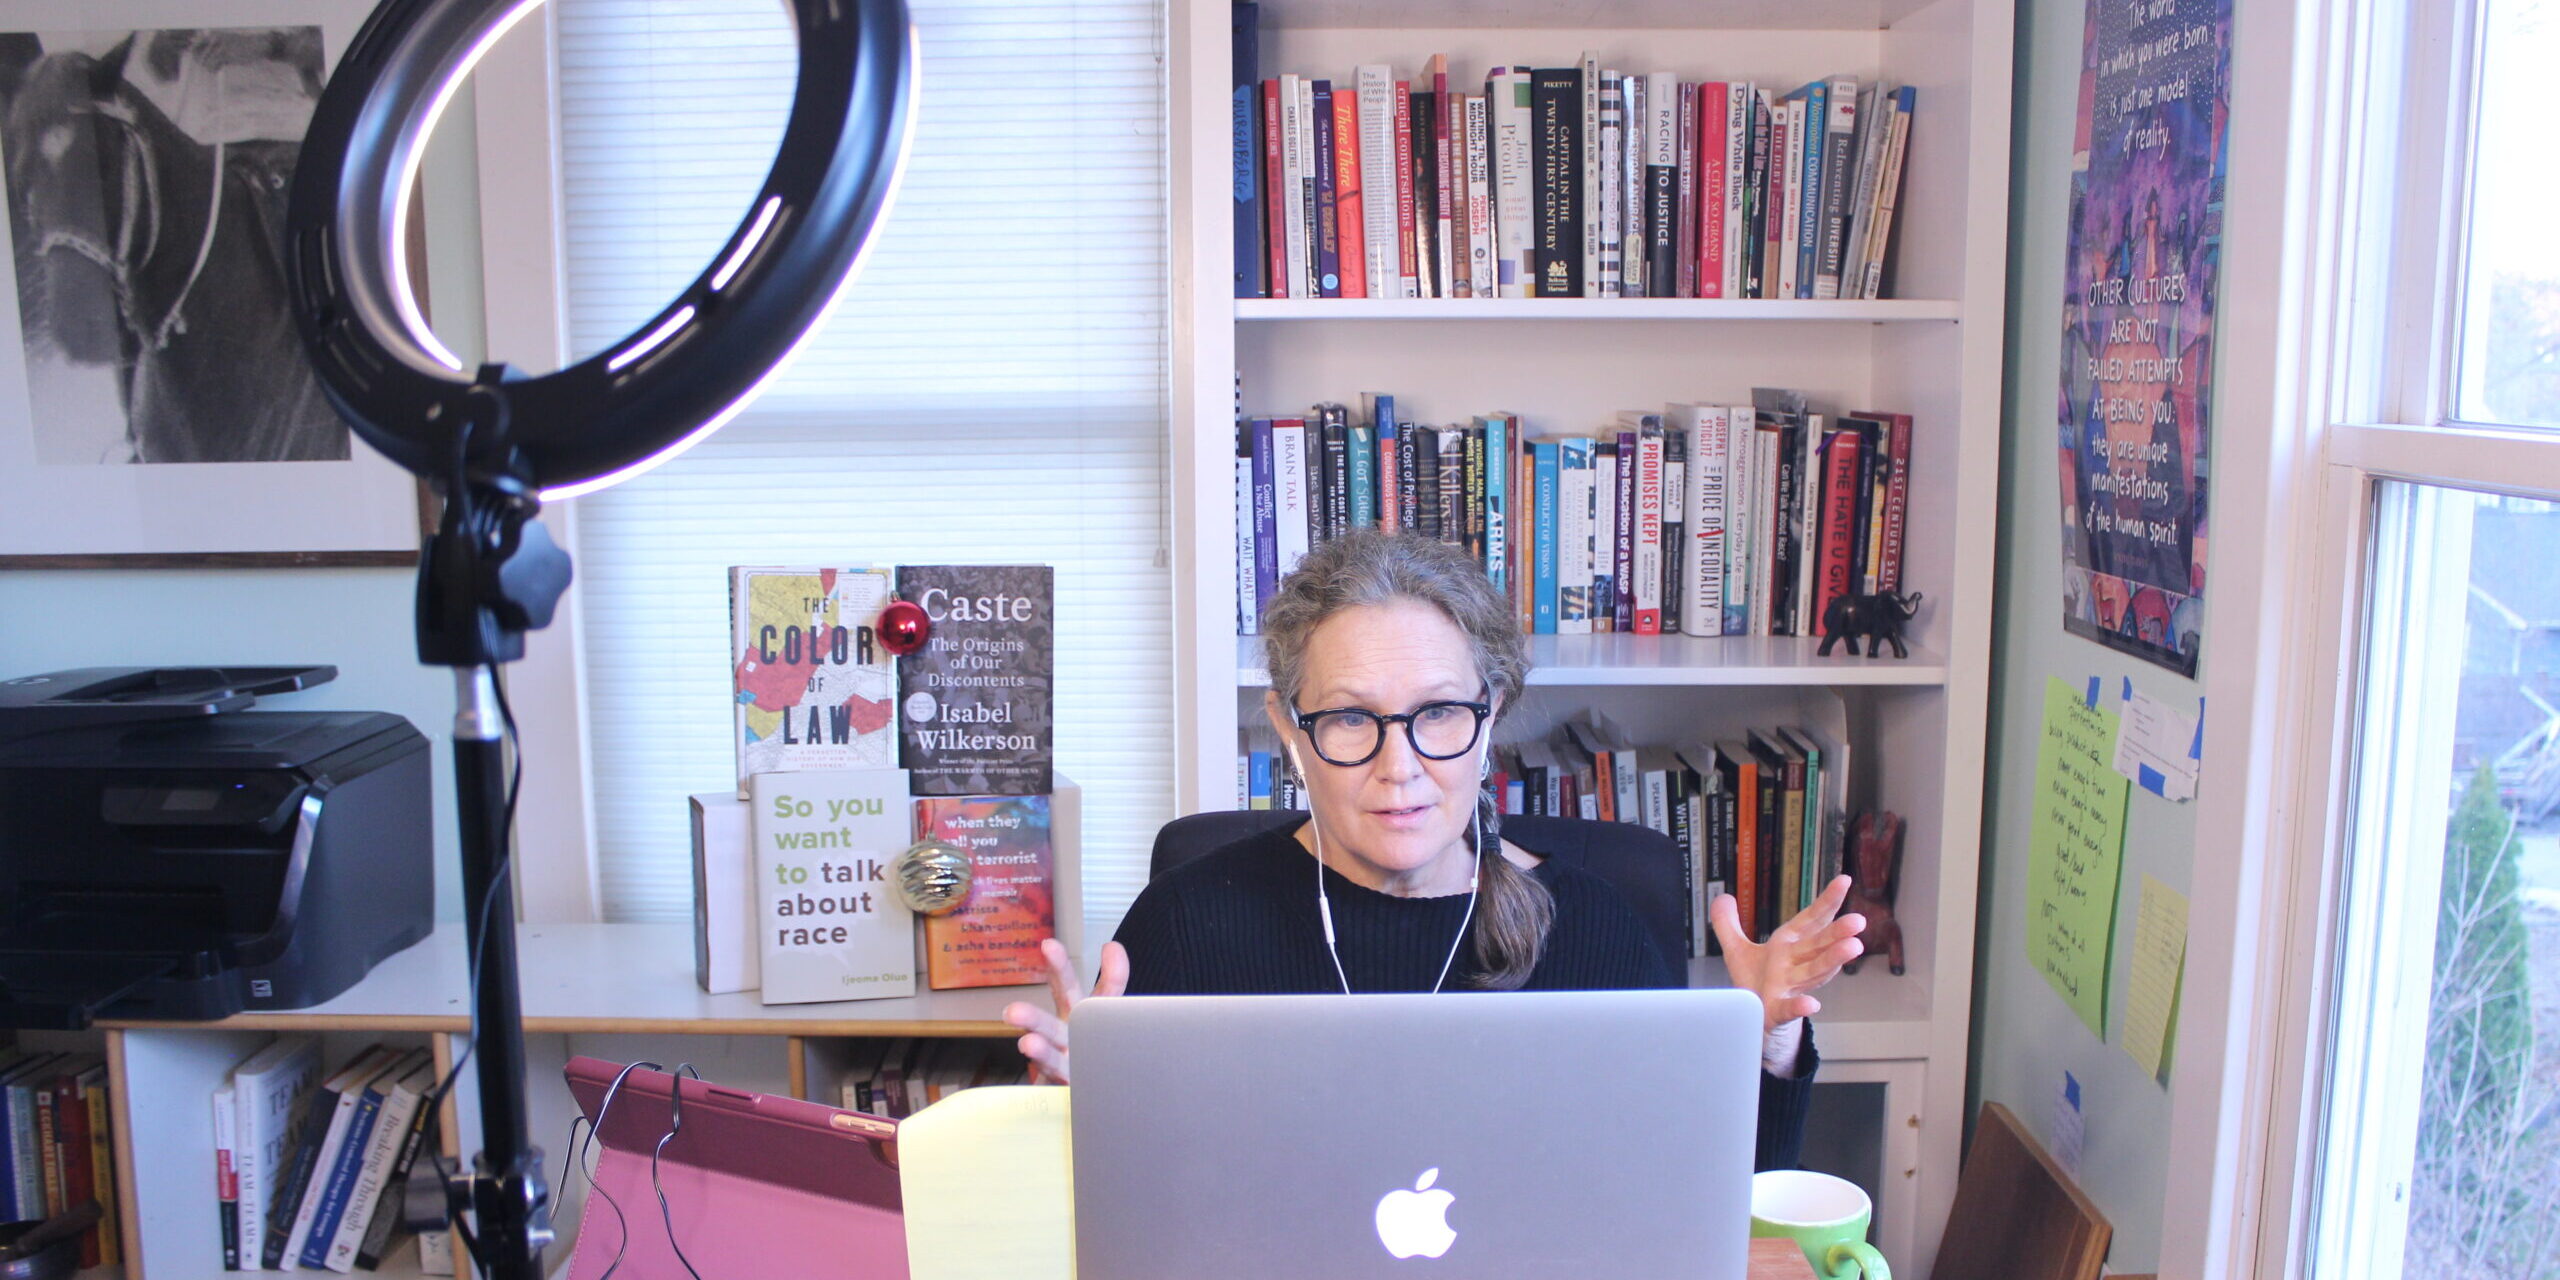 Debby in her office facing her laptop engaged in a presentation. A ring light in the foreground and her bookshelf in the background